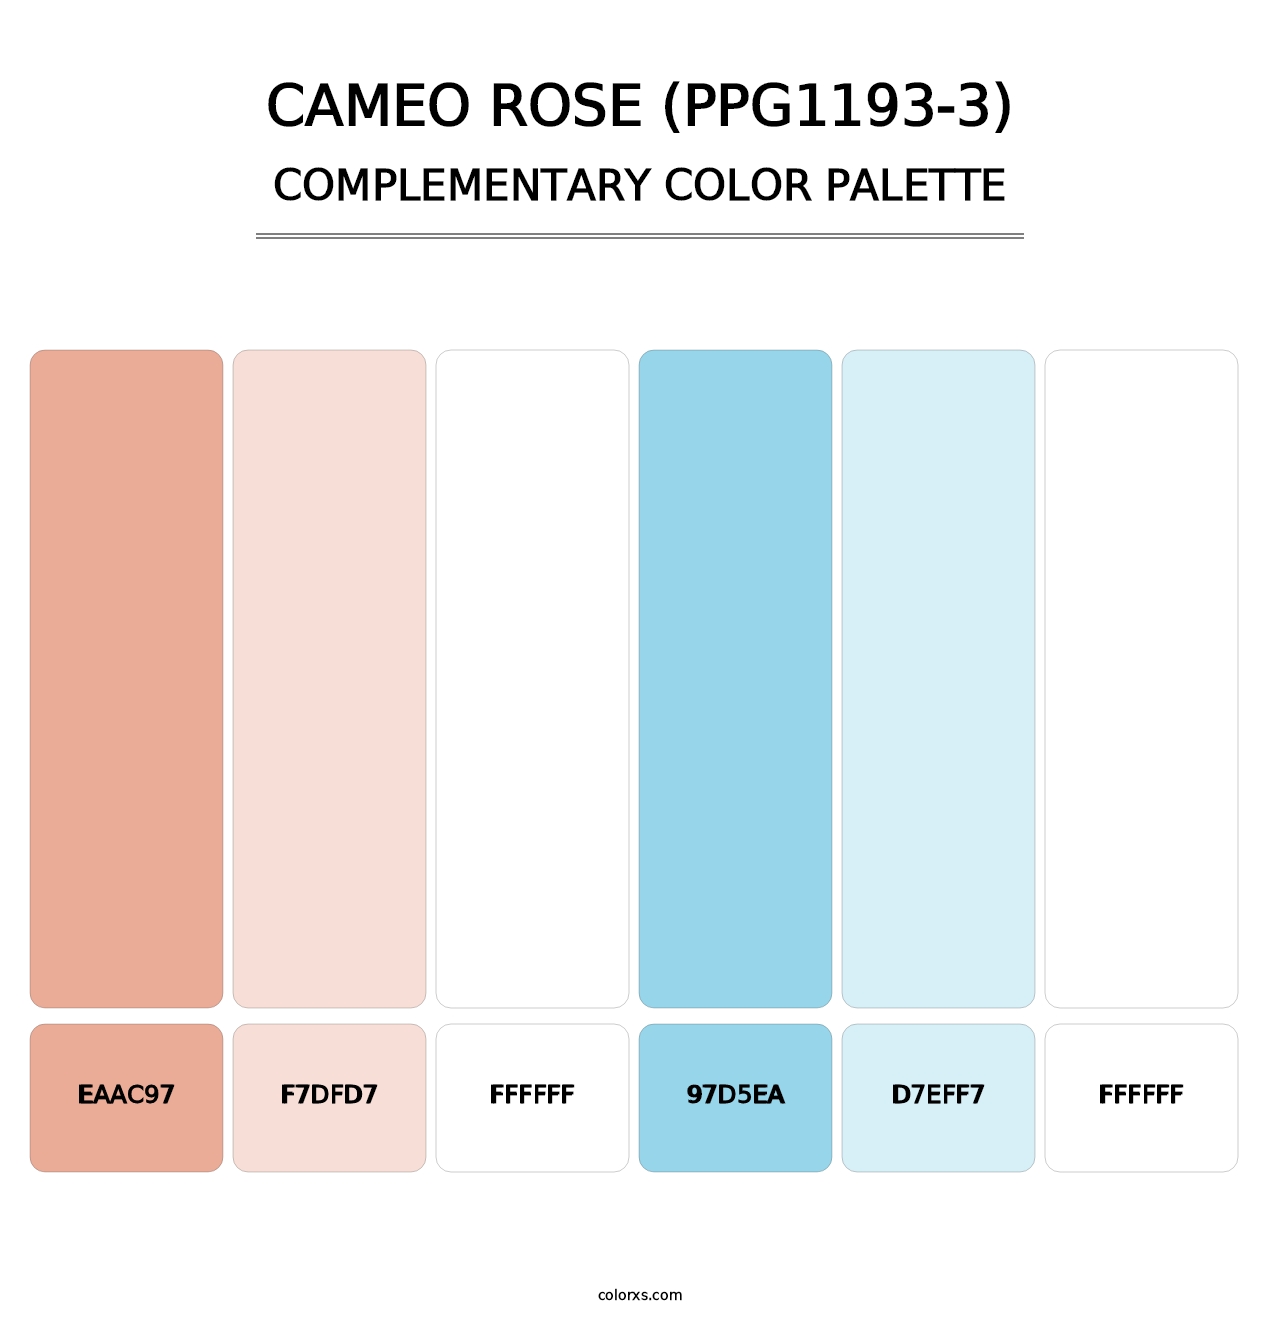 Cameo Rose (PPG1193-3) - Complementary Color Palette